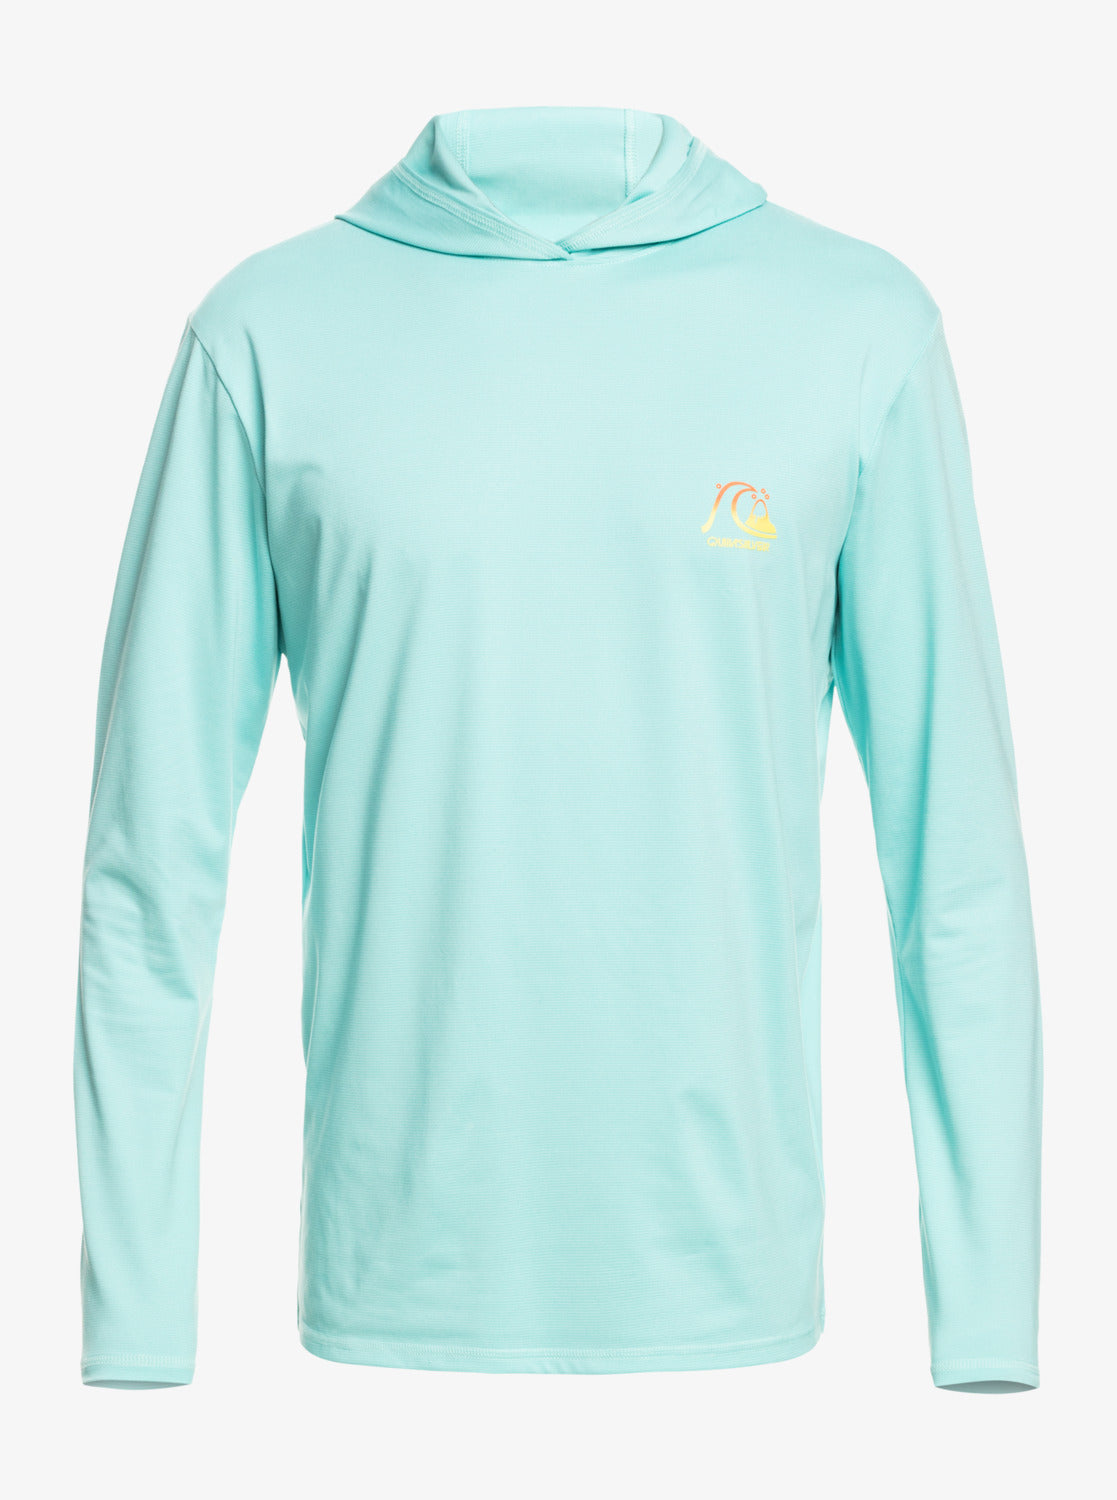 Quiksilver Dredge Hooded Long Sleeve UPF 50 Surf Tee – Sand Surf Co.